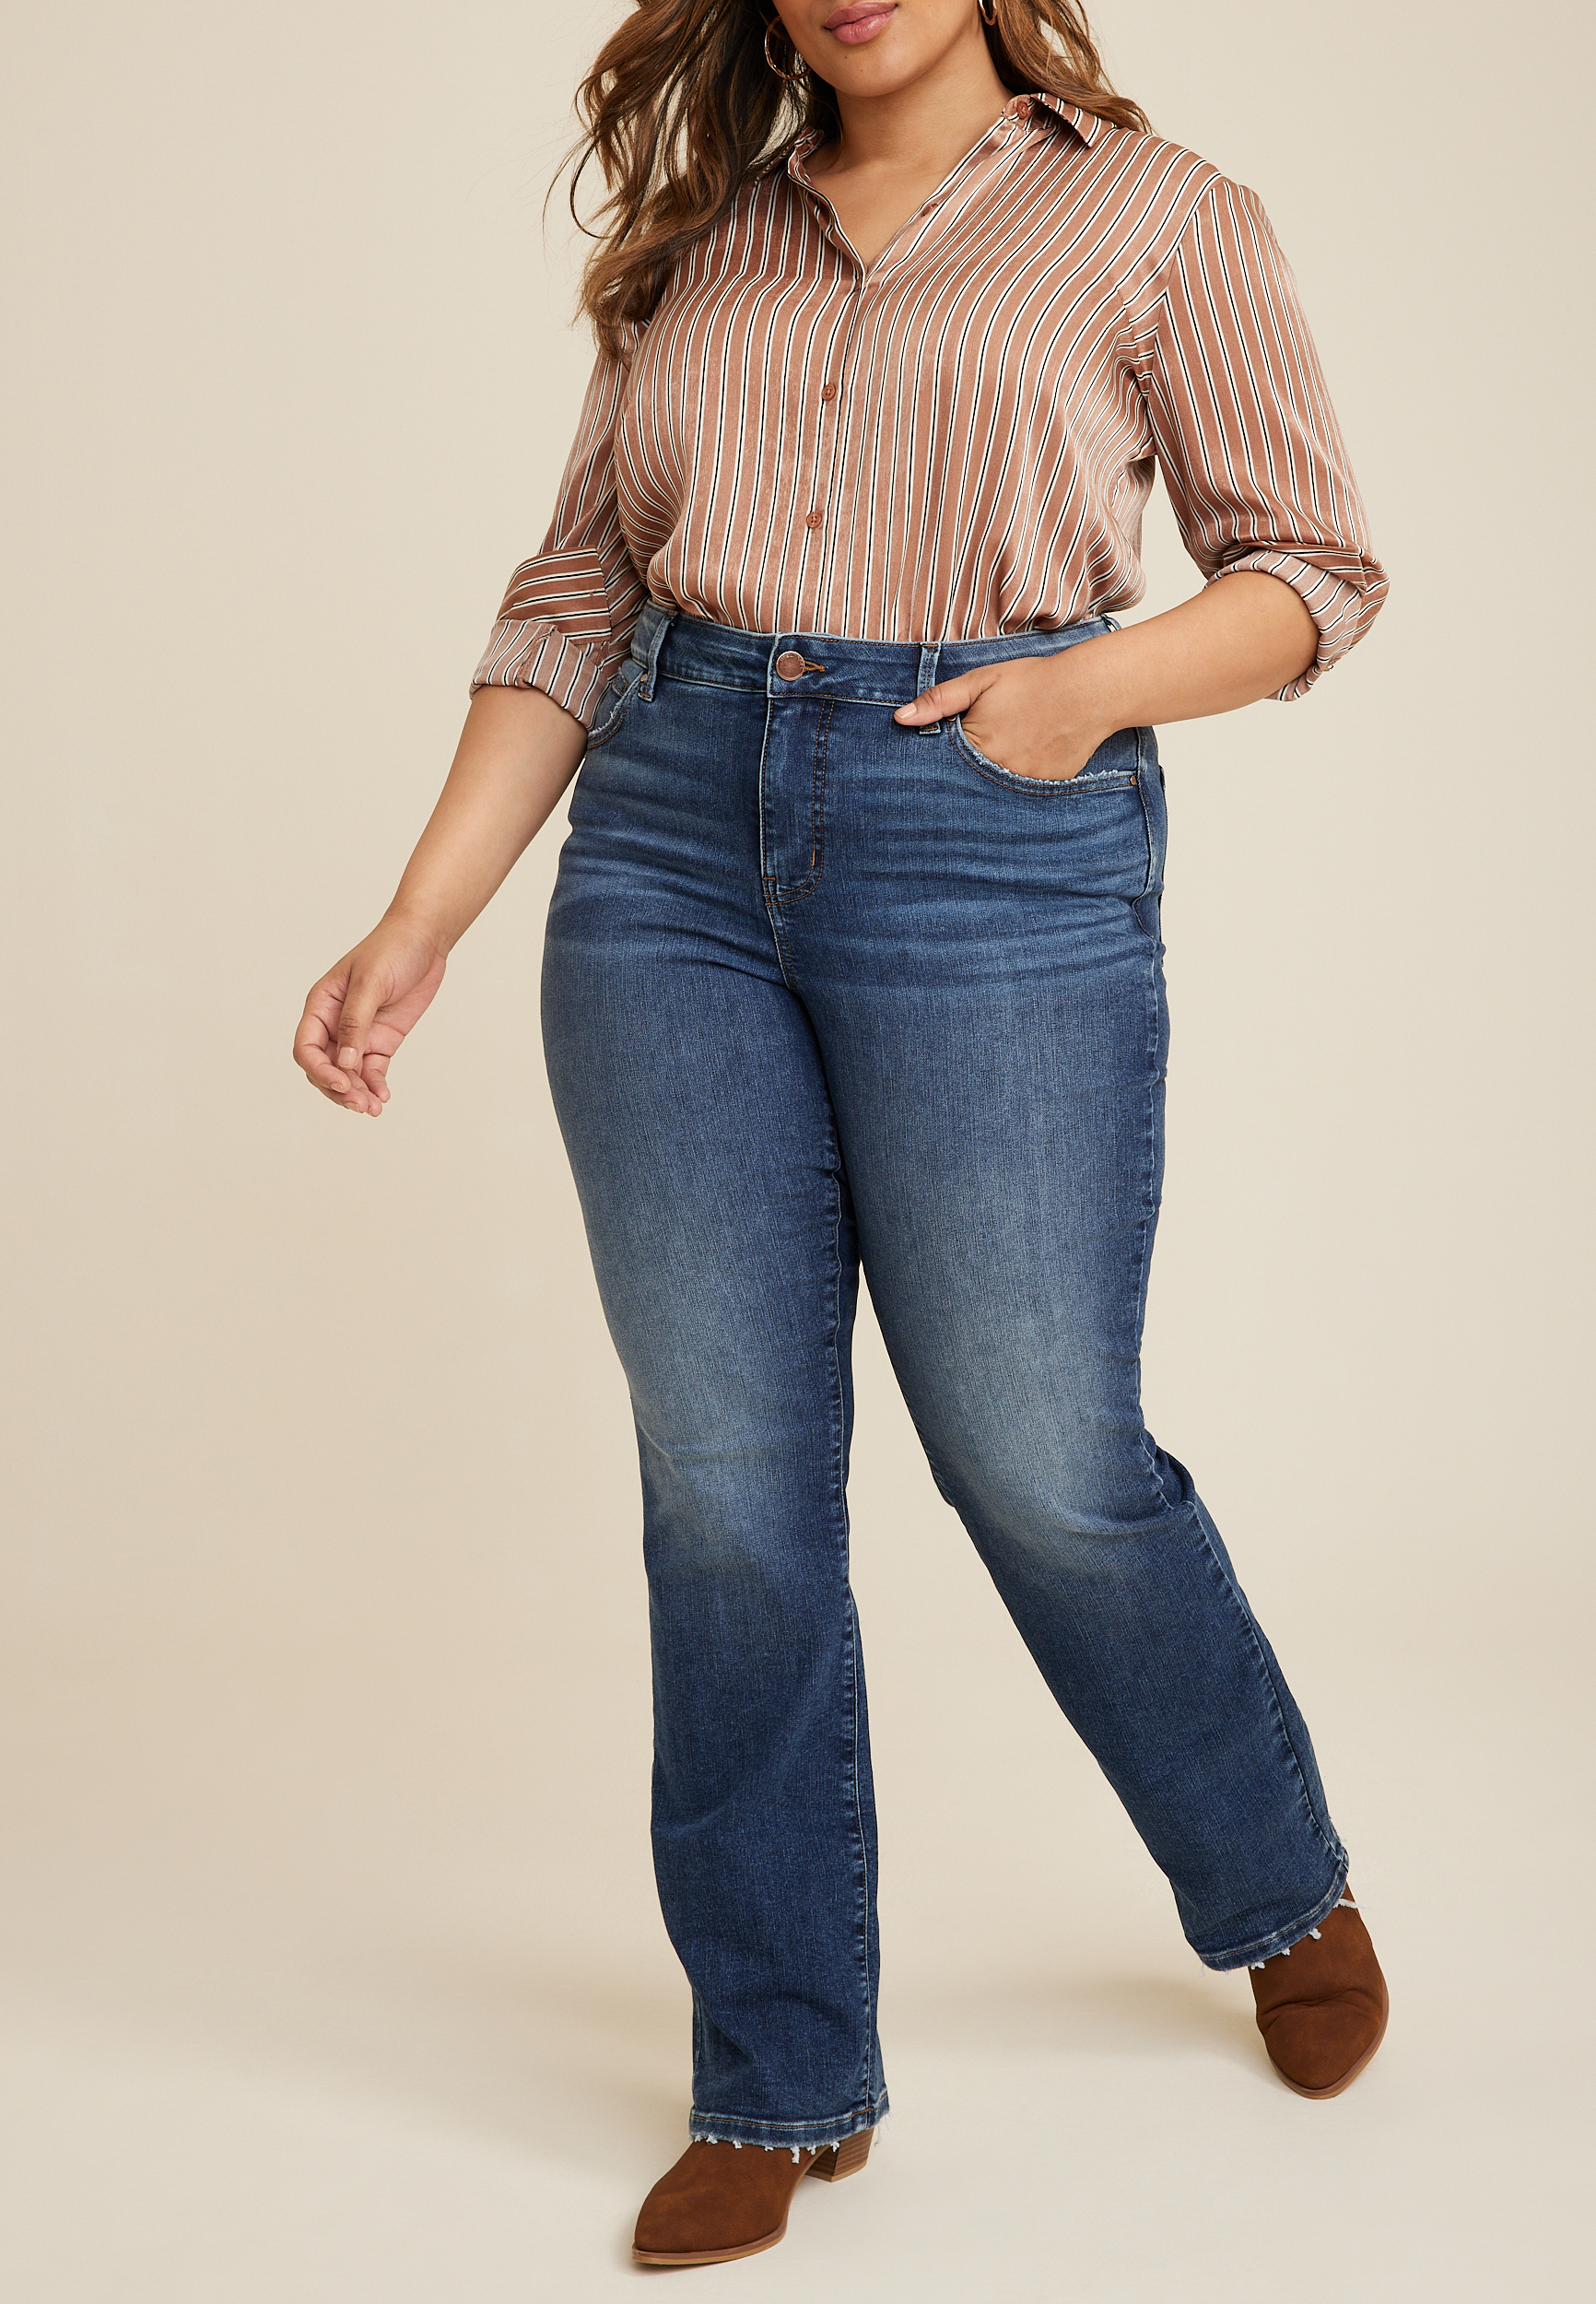 Plus m jeans by maurices™ Everflex™ Curvy High Rise Slim Boot Jean